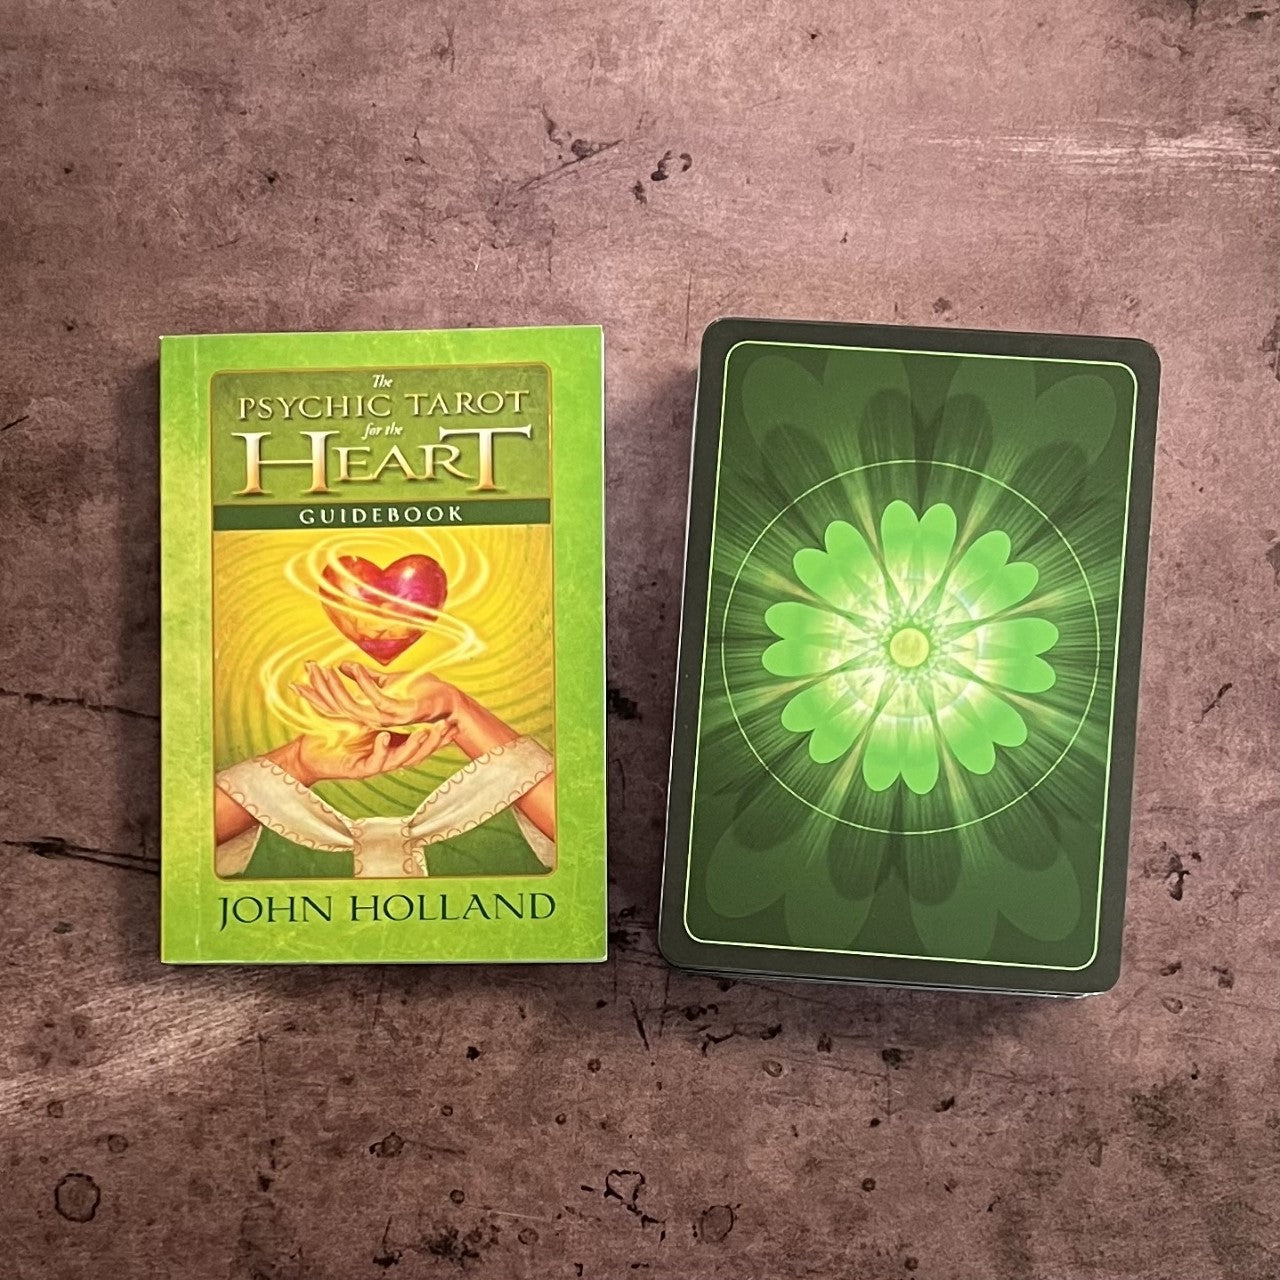 The Psychic Tarot for the Heart by John Holland